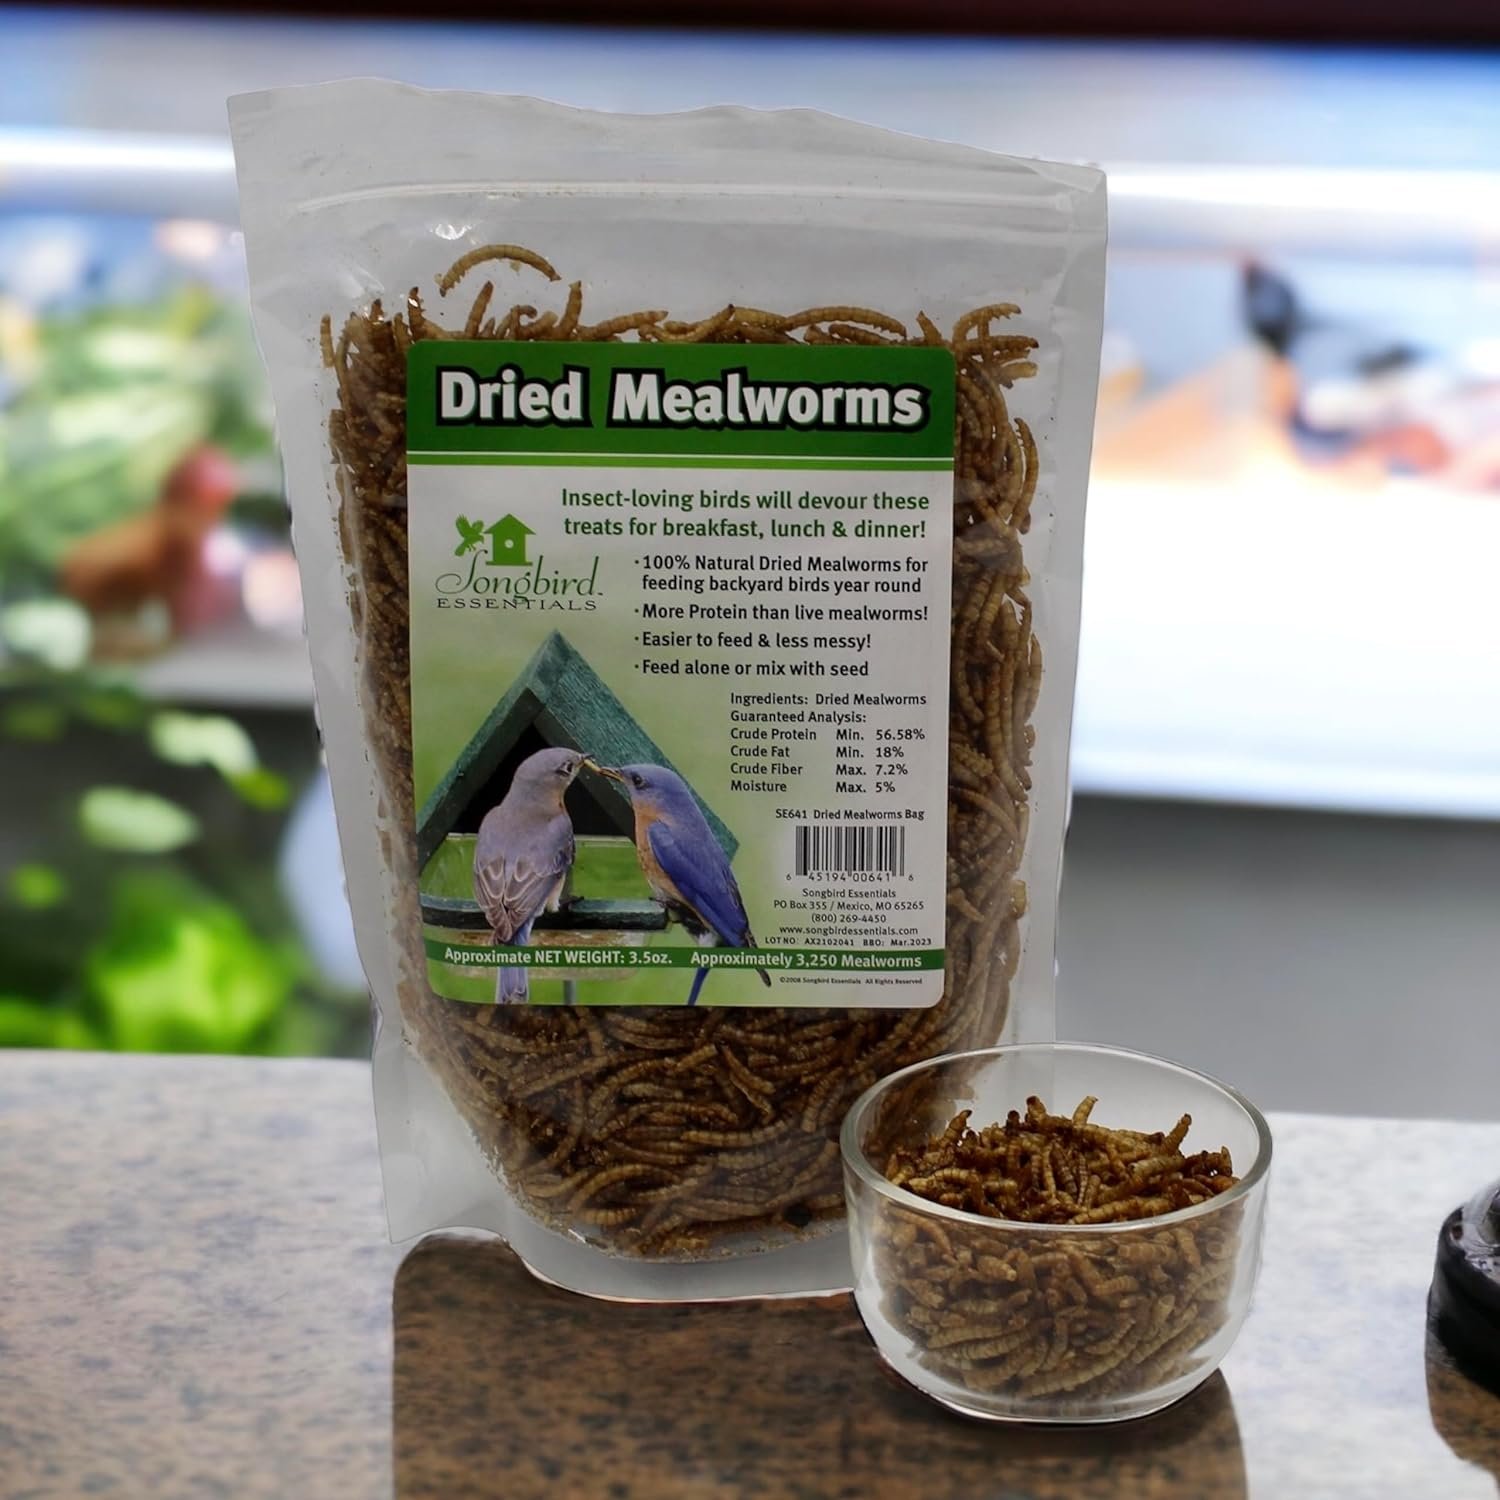 Songbird Essentials Dried Mealworms for Wild Birds, 100% Natural Mealworms for Chickens, Bluebirds, Reptiles and Ducks, 3.5 Ounce Packet